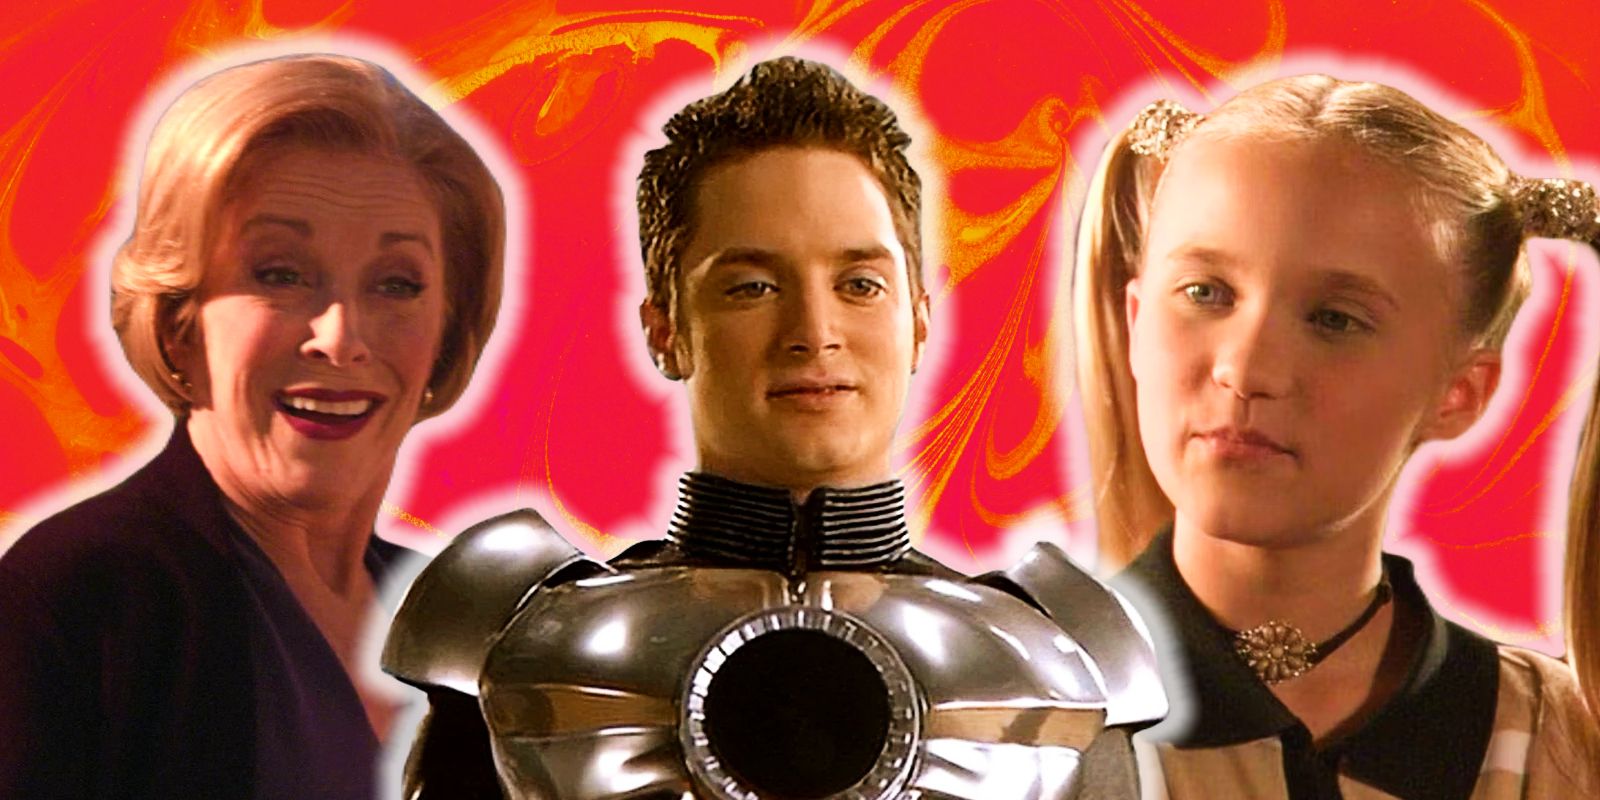 This custom image shows Holland Taylor, Elijah Wood, and Emily Osment in the Spy Kids movies.